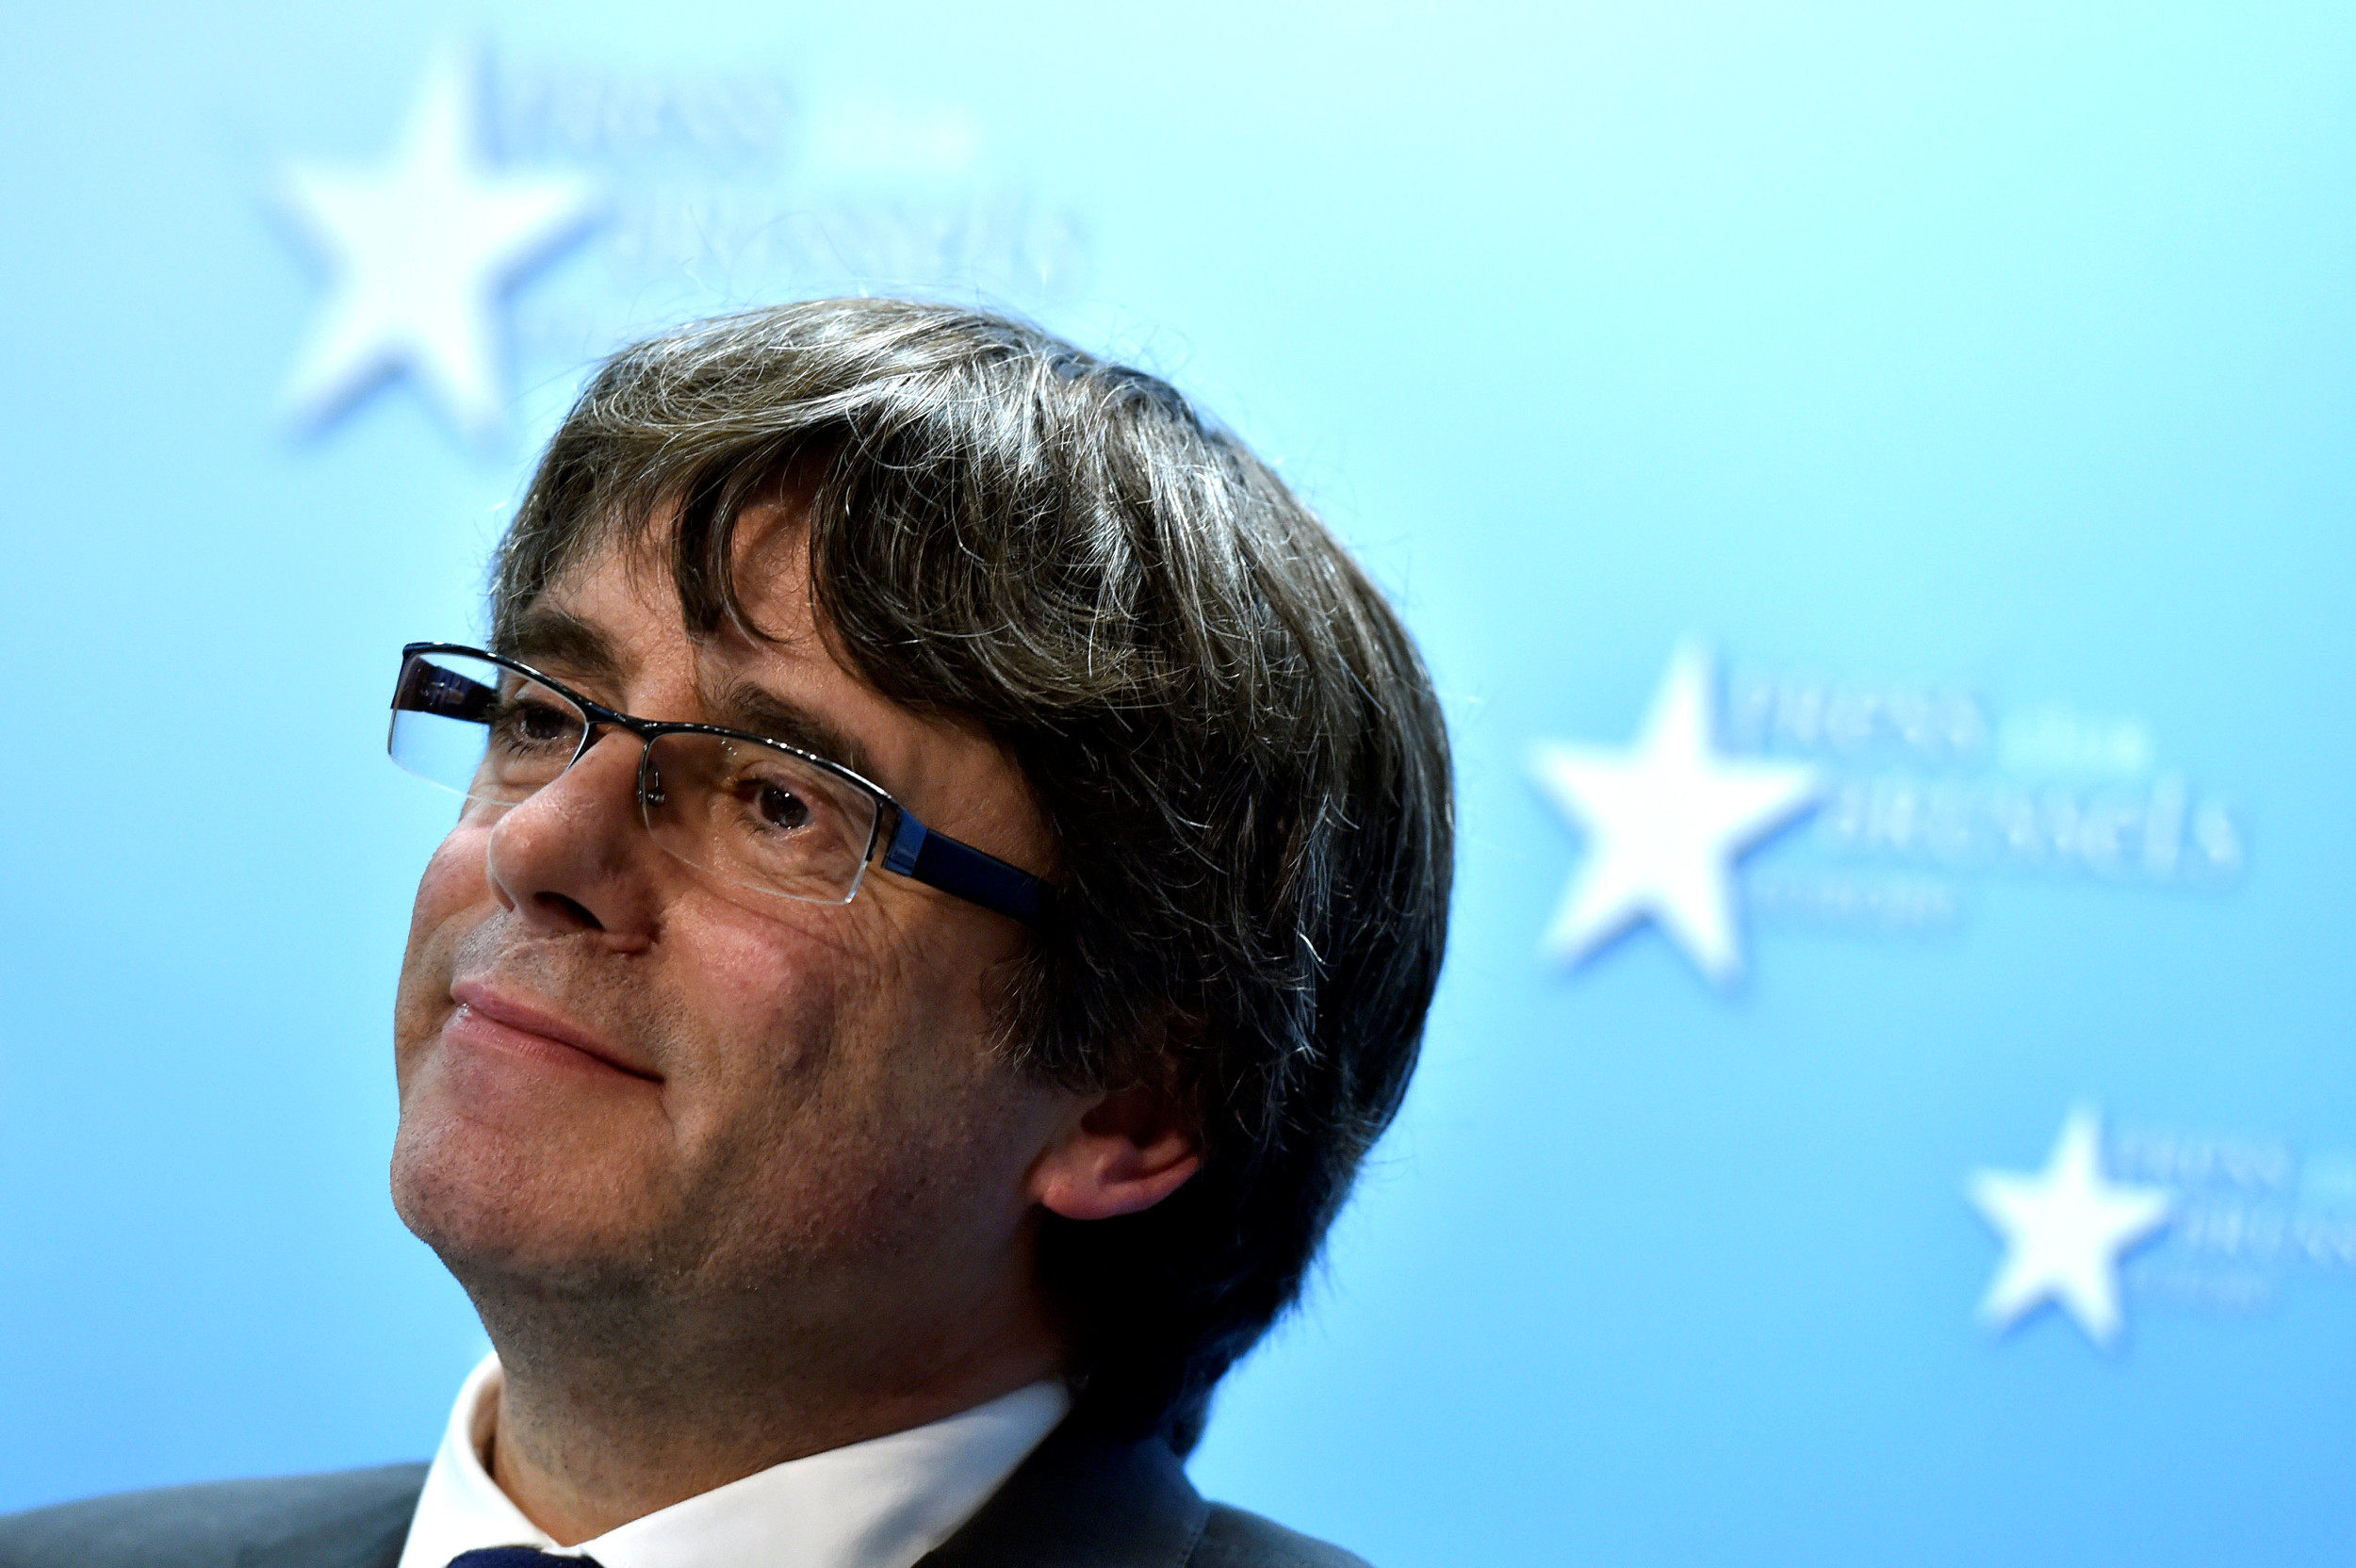 Puigdemont during the press conference in Brussels on October 31 (by REUTERS)